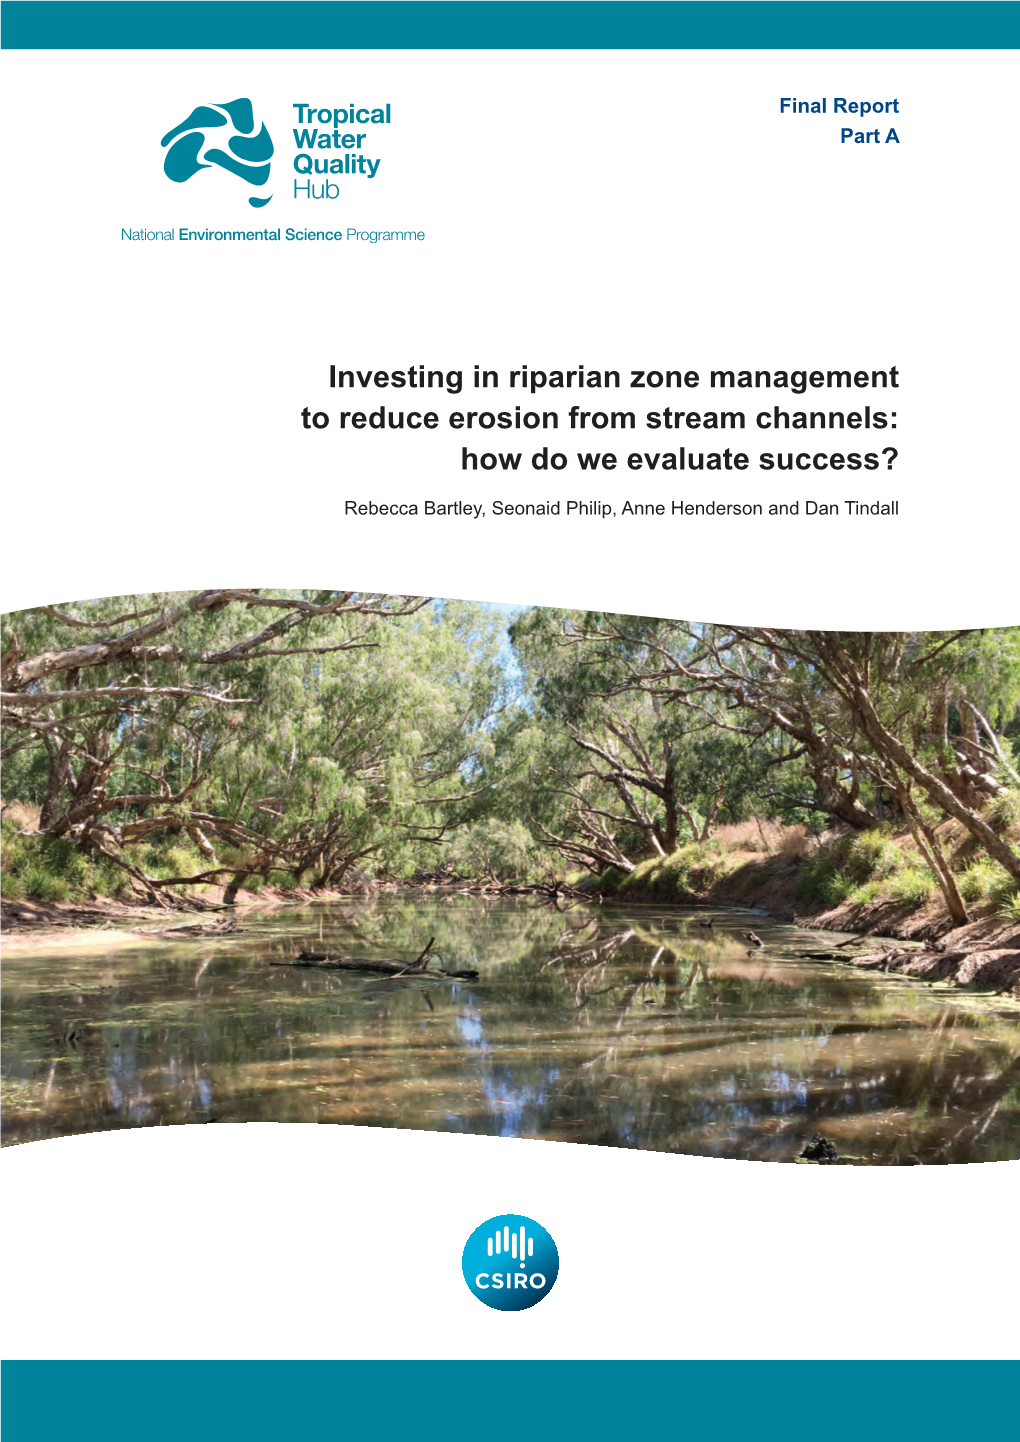 Investing in Riparian Zone Management to Reduce Erosion from Stream Channels: How Do We Evaluate Success?